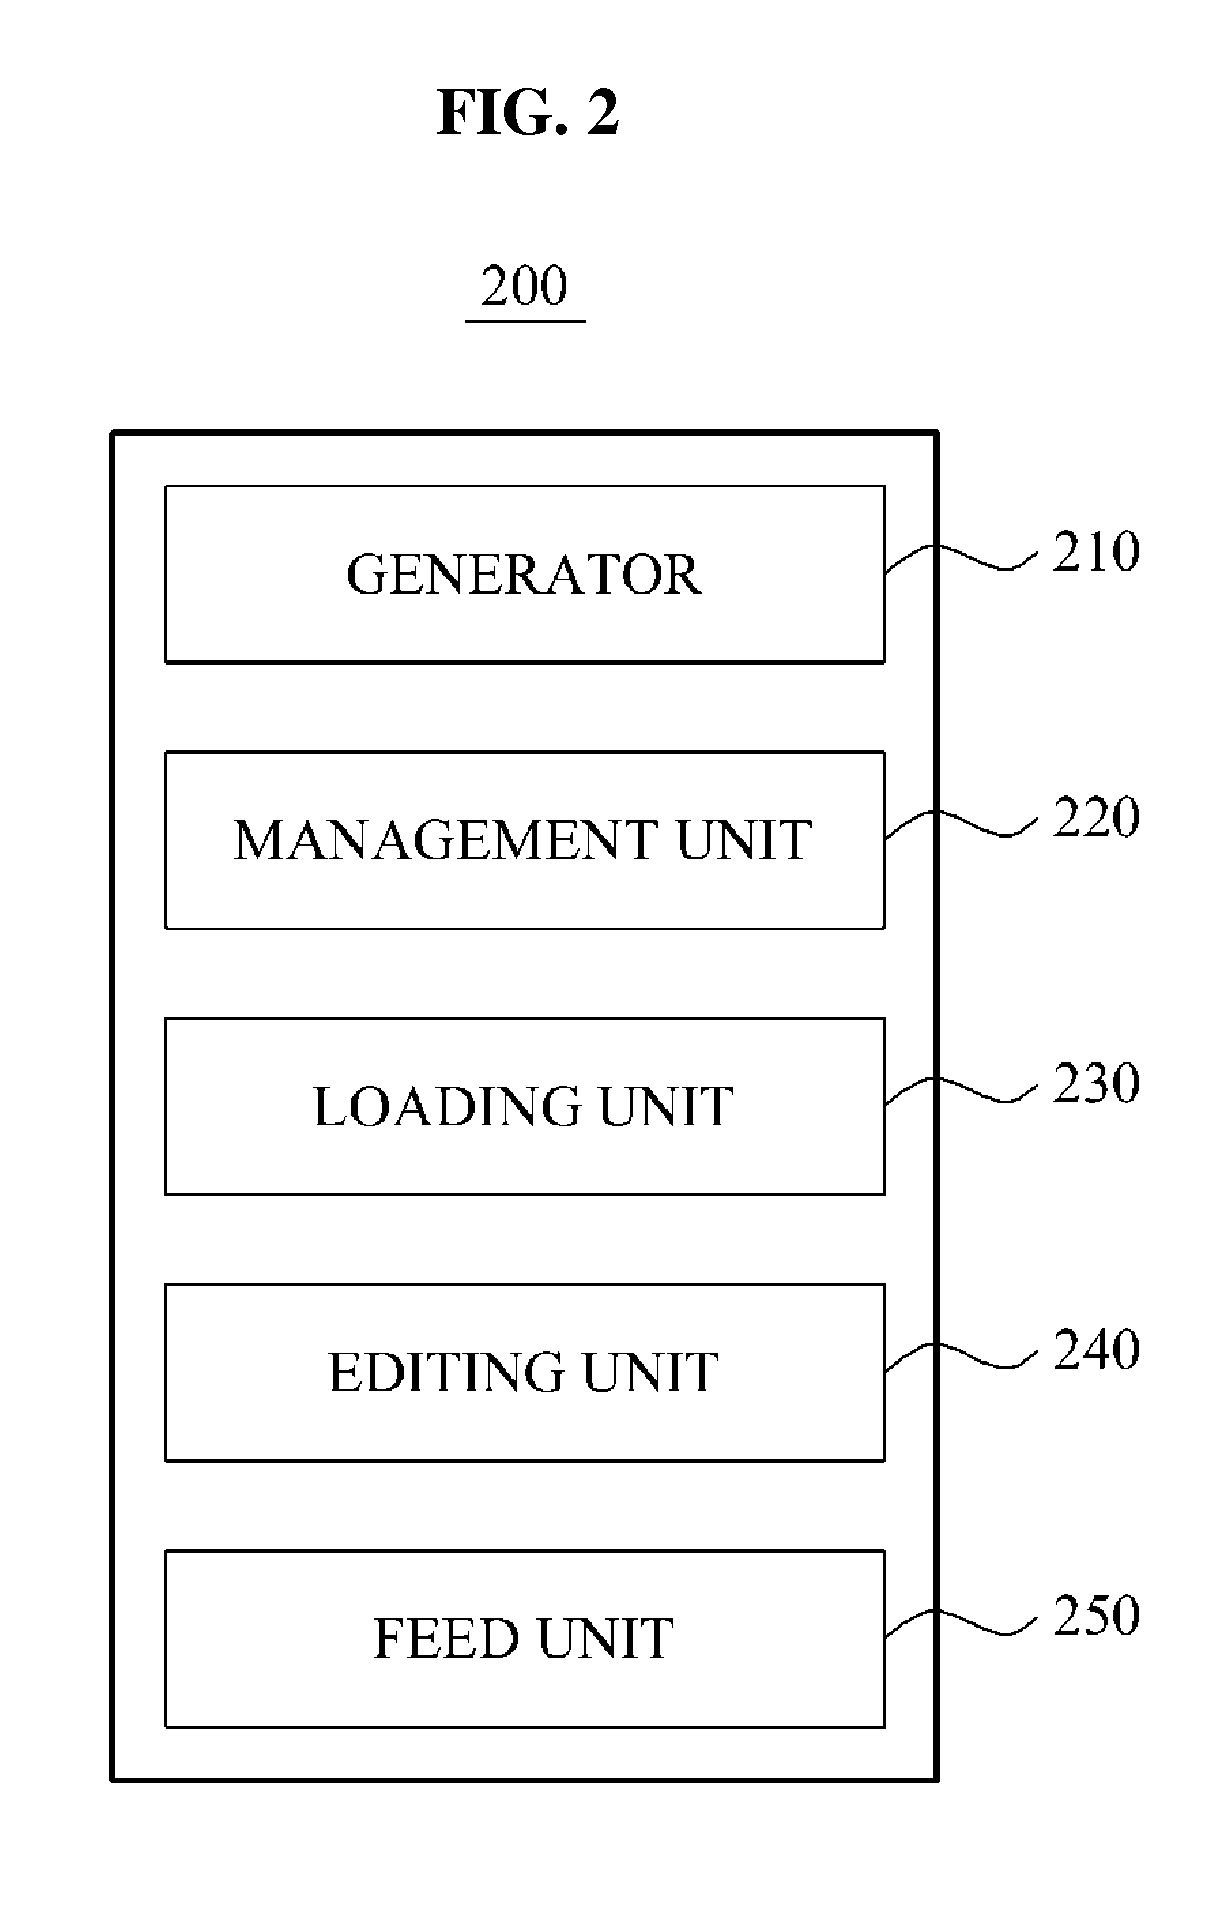 System and method for managing and sharing images on per album basis